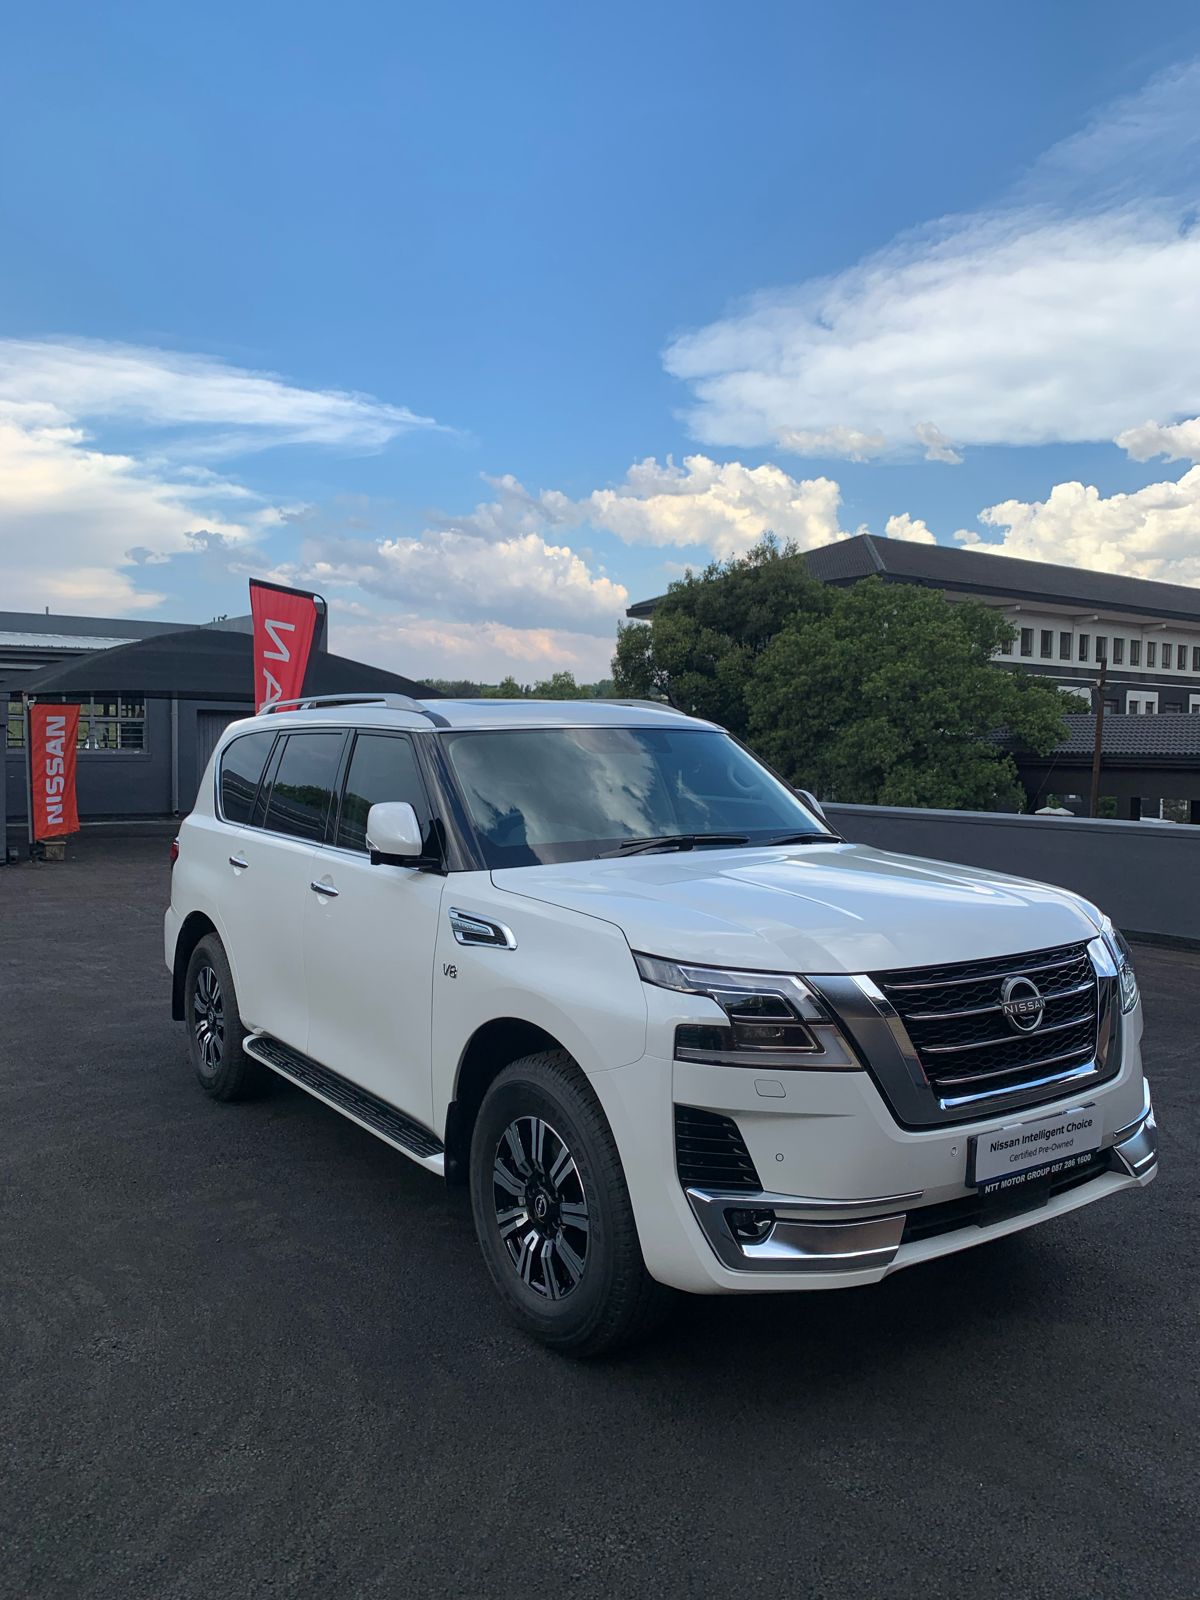 NISSAN PATROL 5.6 V8 LE PREMIUM for Sale in South Africa